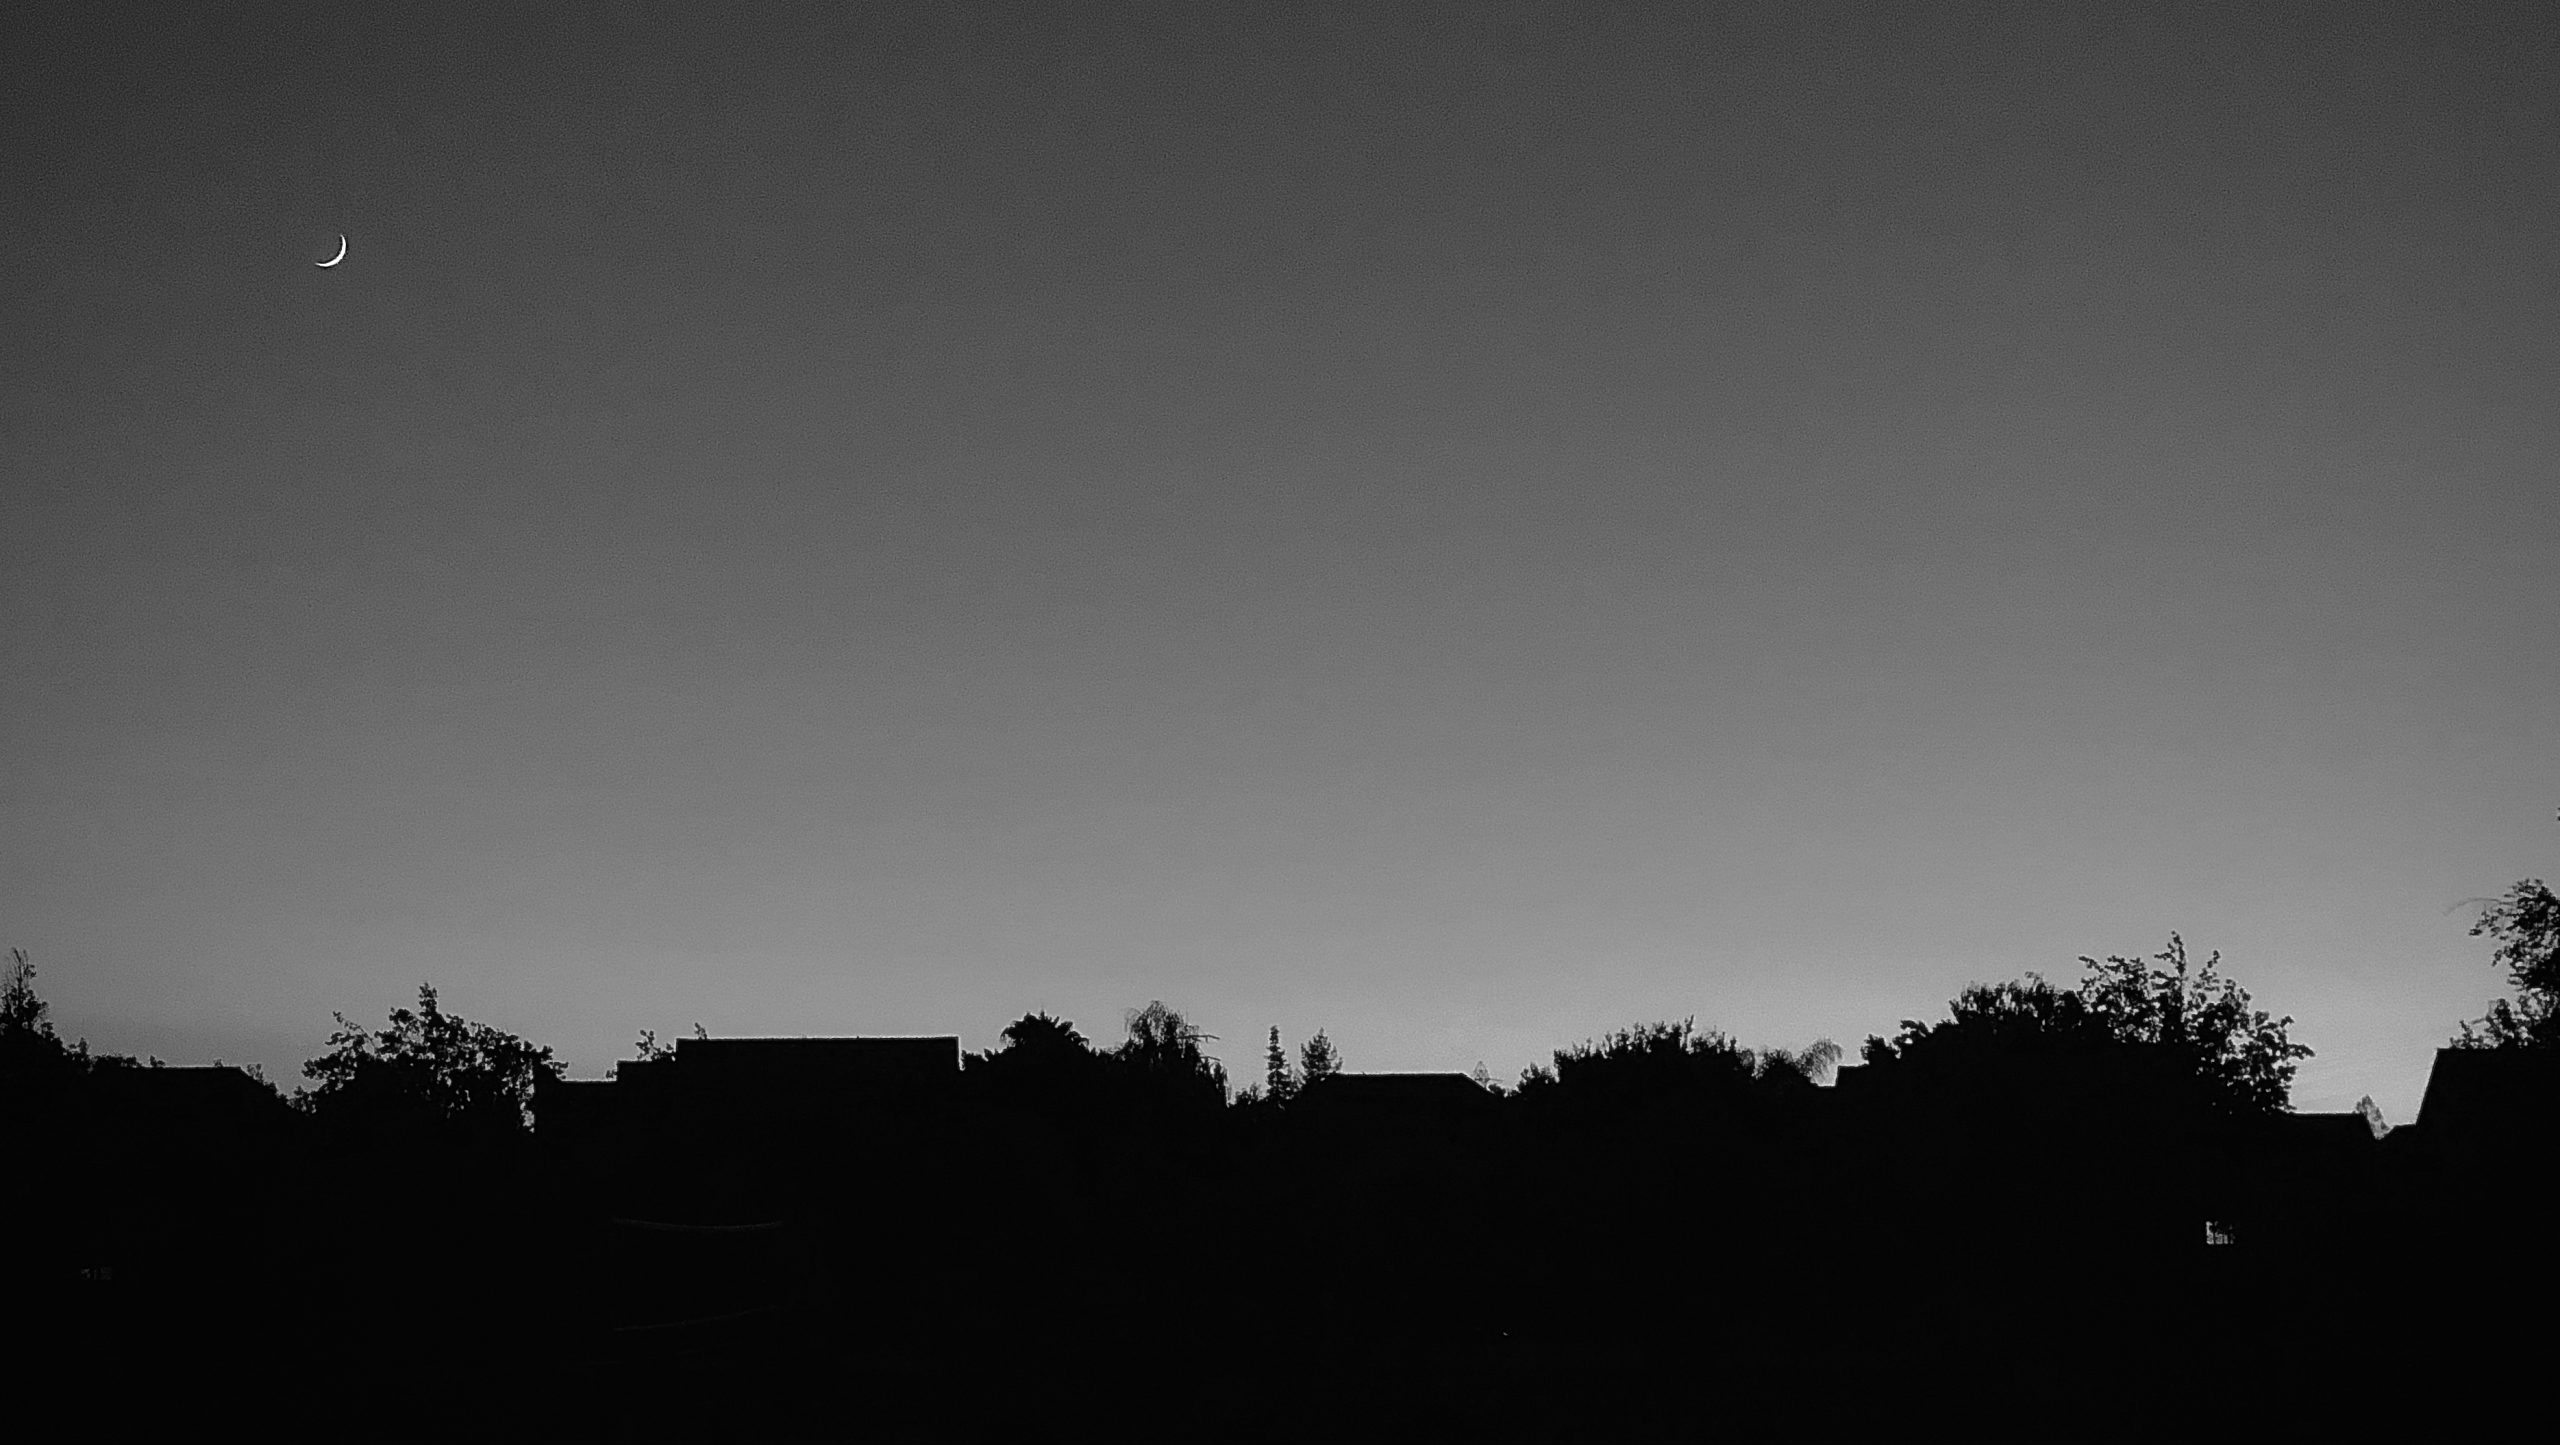 A silhouetted suburb against the grey sky with a crescent moon in the top left corner.  